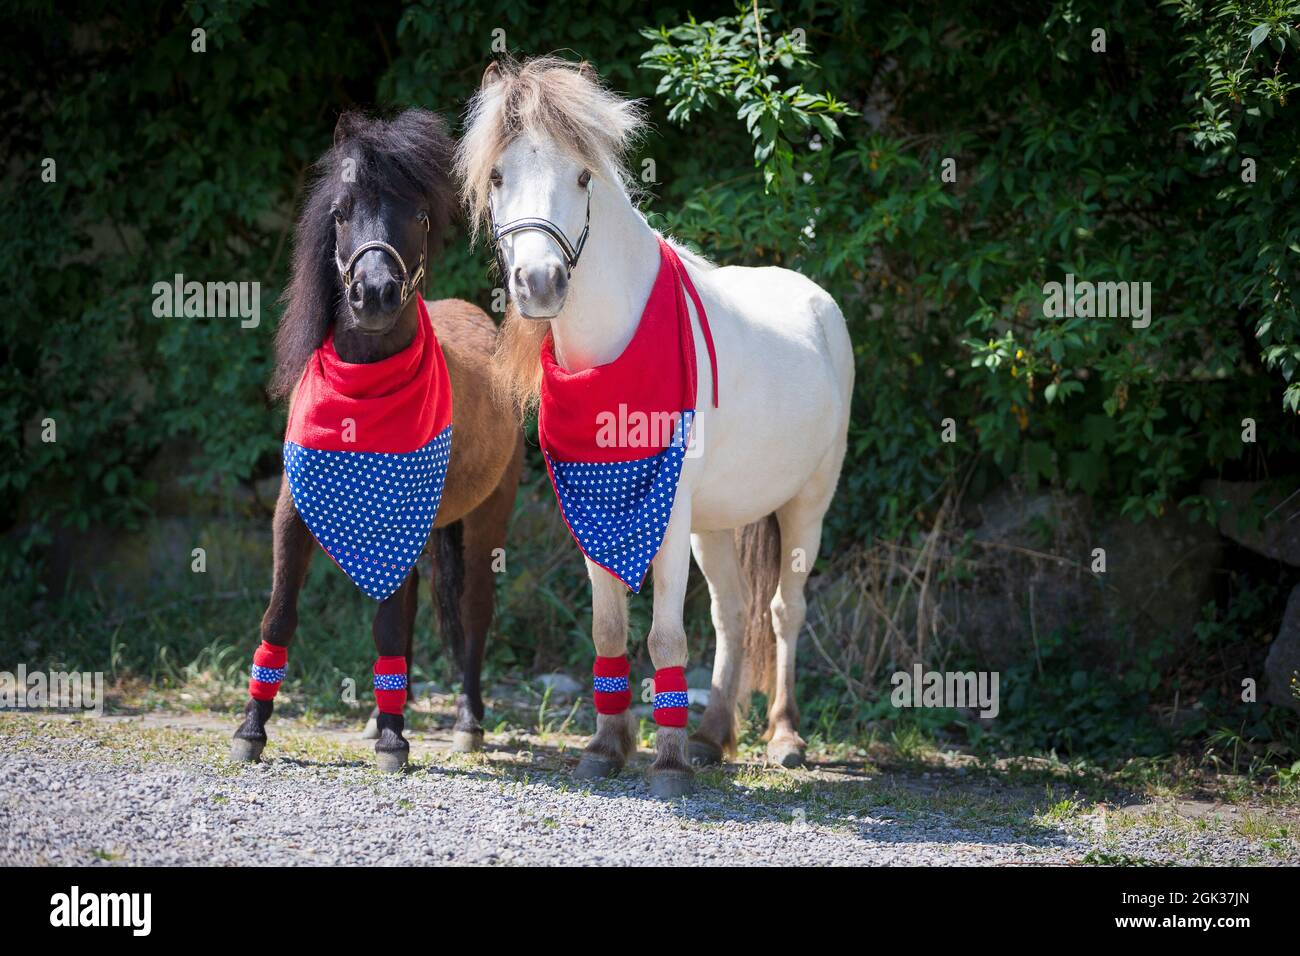 Falabella Miniature Horse. A black horse and a gray horse, dressed in a collar and gaiters, stand next to each other. Germany Stock Photo